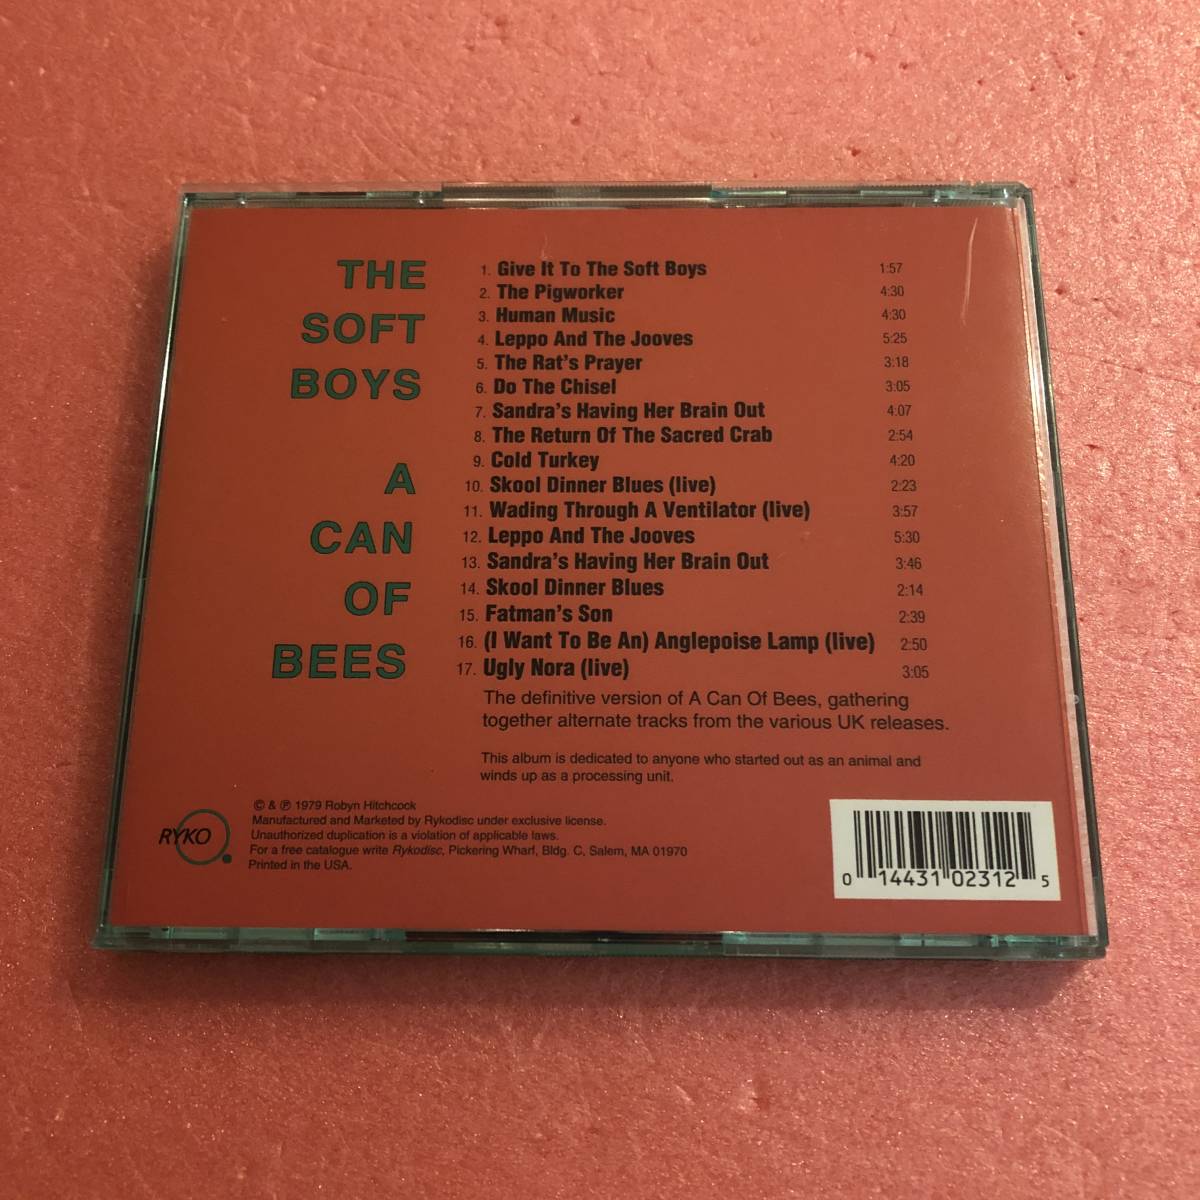 CD 国内盤 帯付 ソフト ボーイズ キャン オブ ビーズ The Soft Boys A Can Of Bees R.E.M. New Wave_画像3